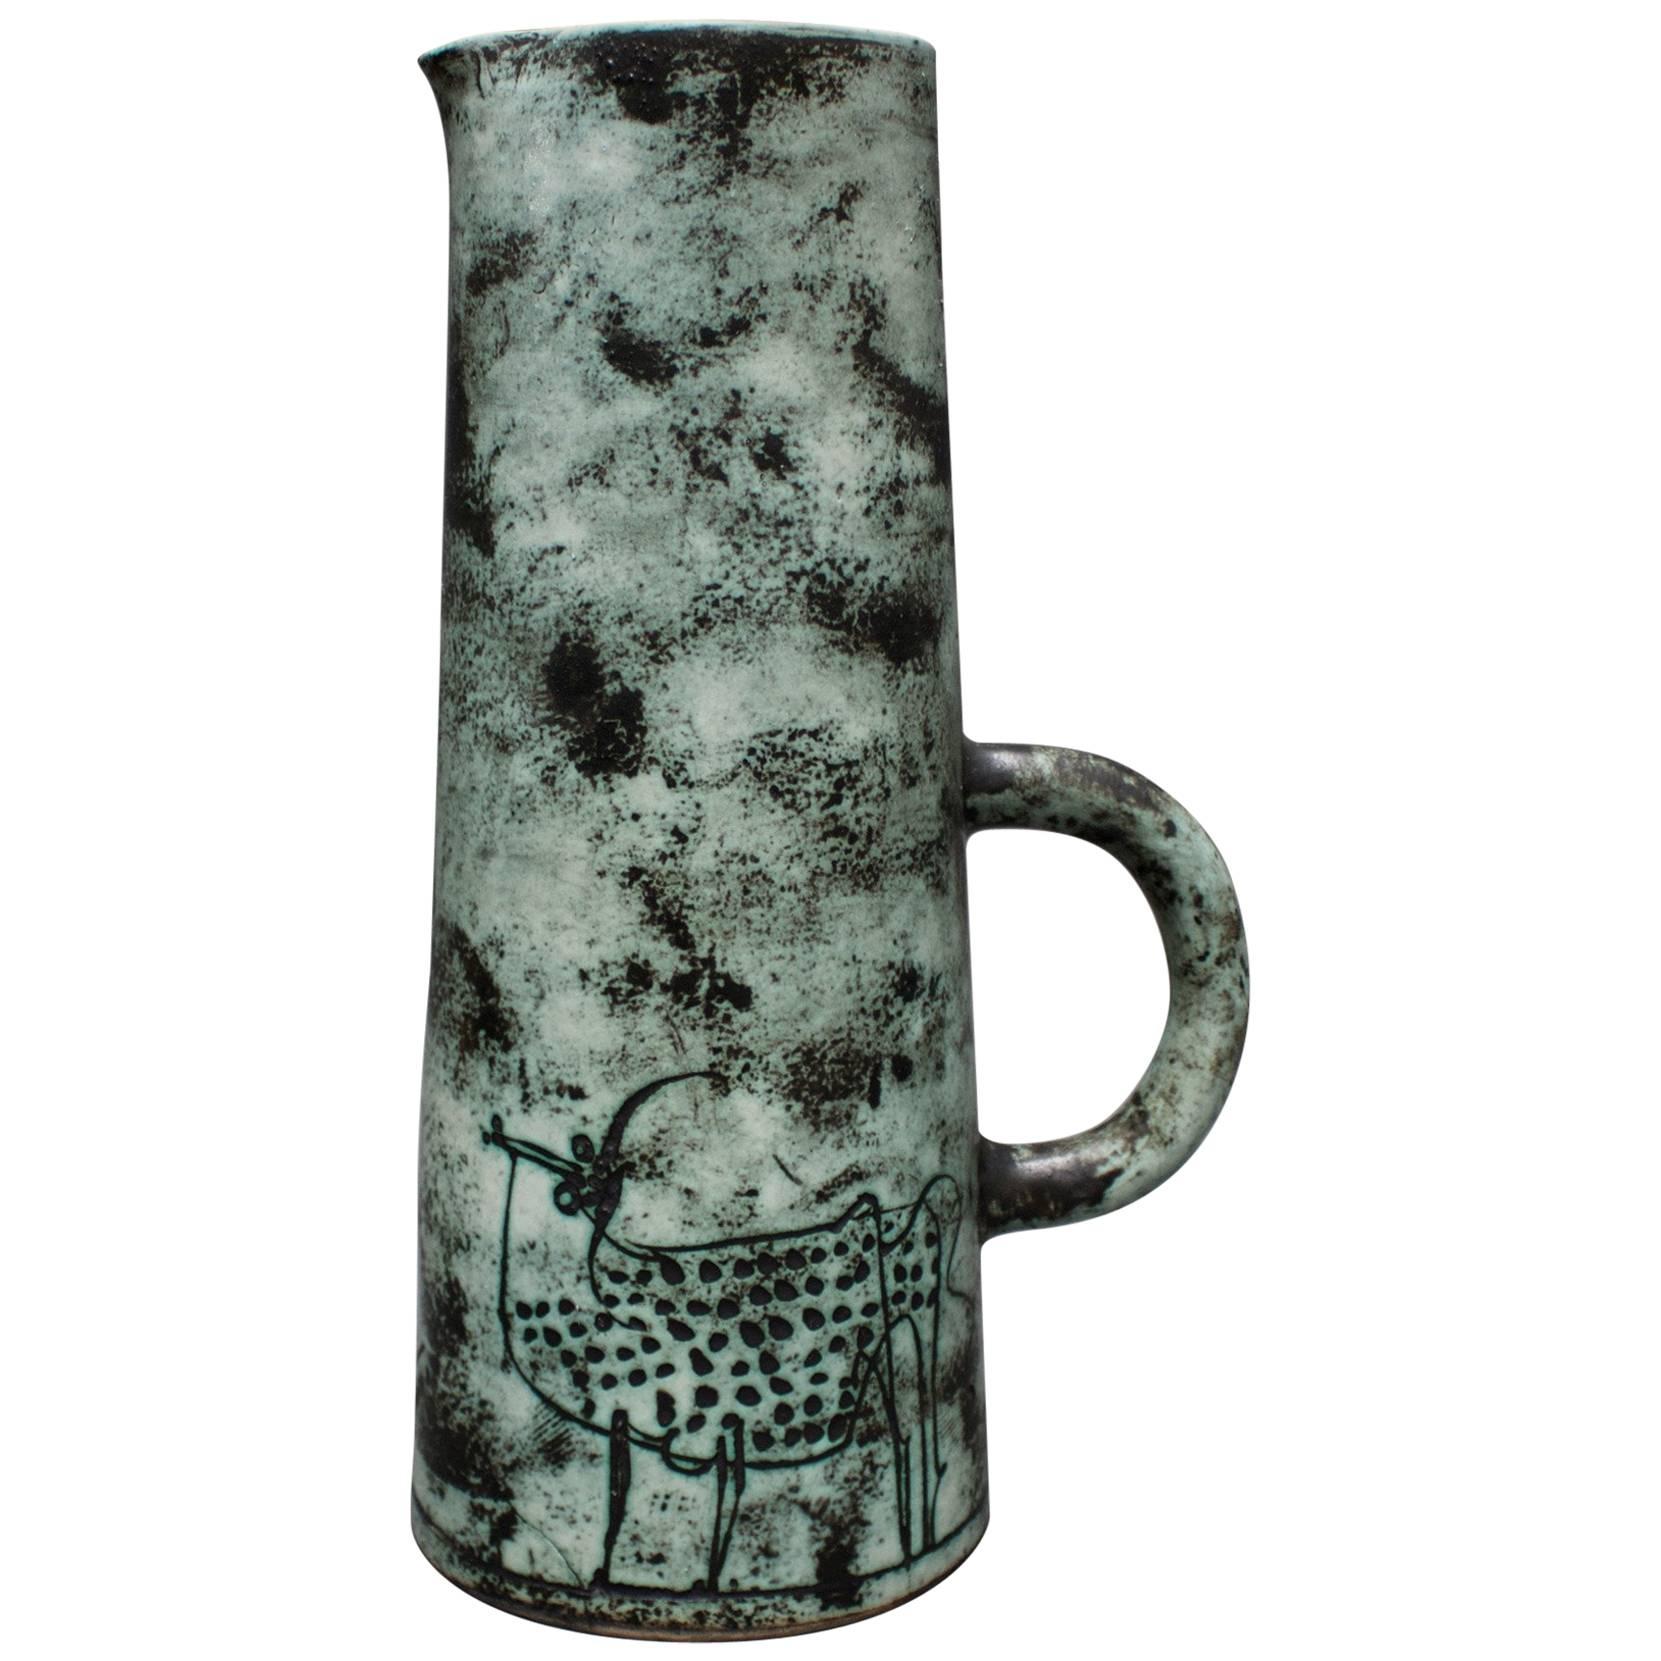 Ceramic Pitcher by Jacques Blin, Vallauris, France, circa 1950s - 60s